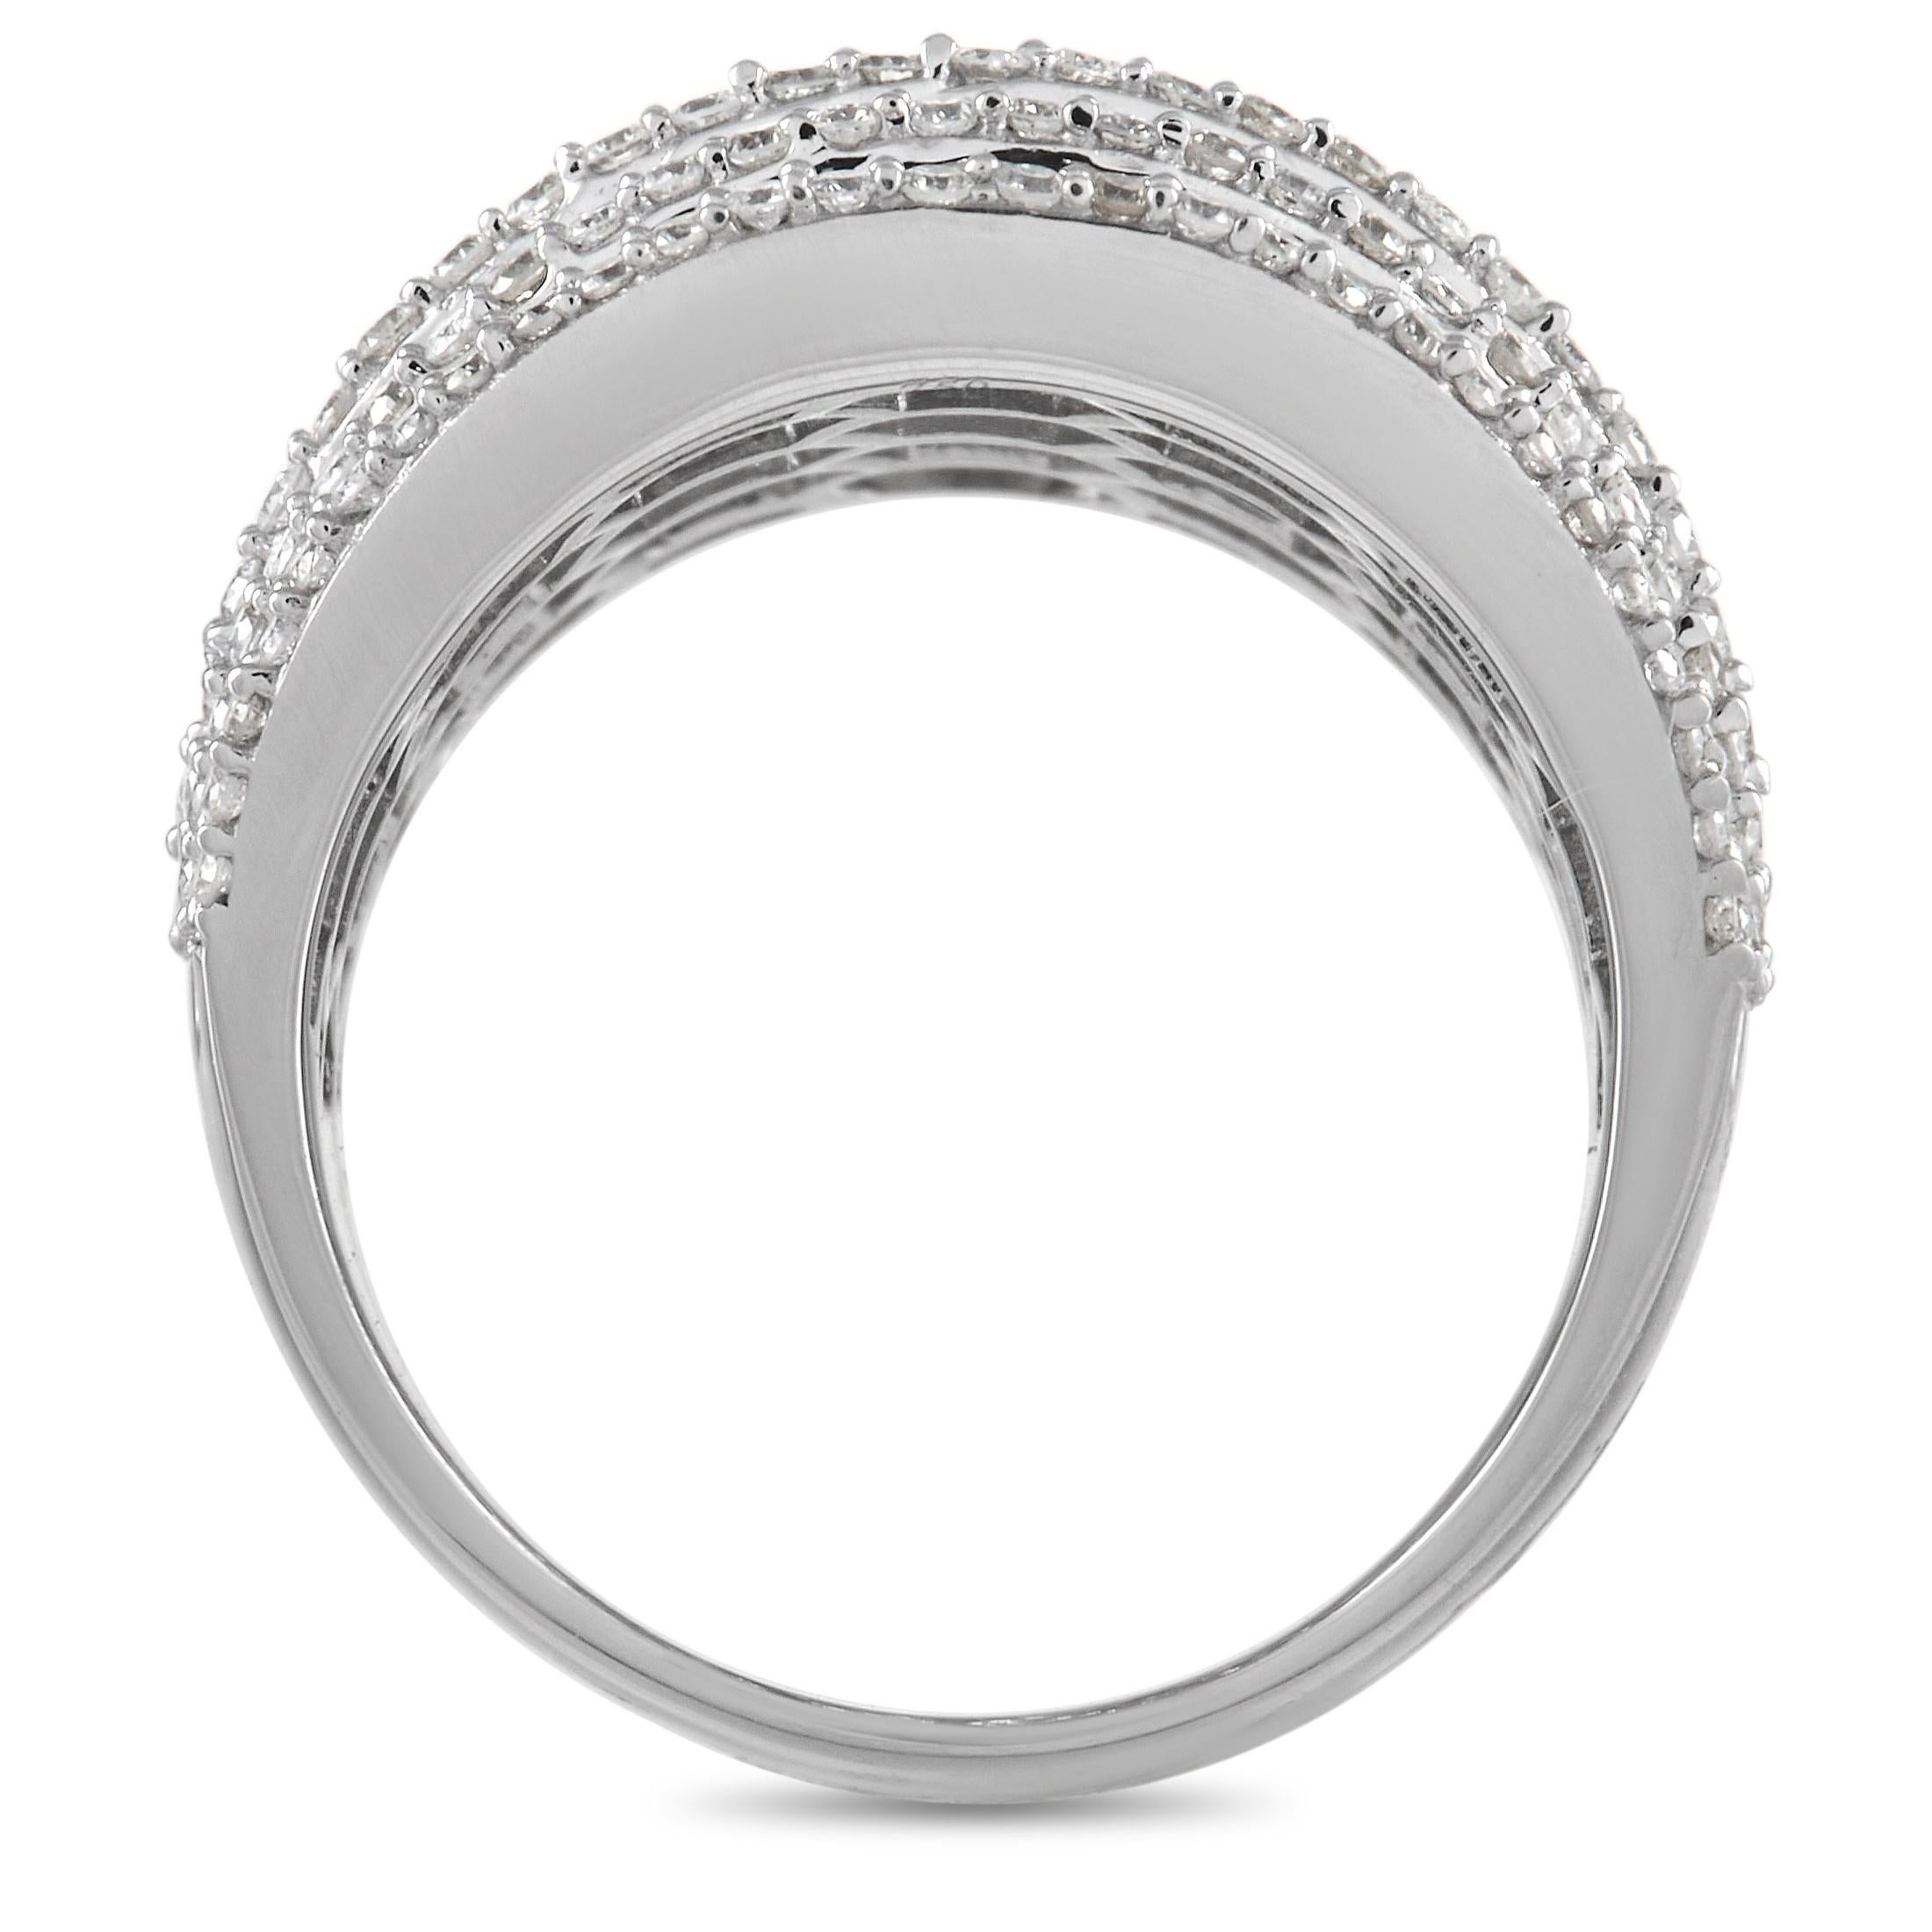 Diamond baguettes totaling 3.75 carats and round-cut diamonds with a total weight of 1.00 carats make this ring a luxurious addition to any ensemble. Bold and breathtaking in design, it features a sleek 18K white gold setting with a 12mm wide band